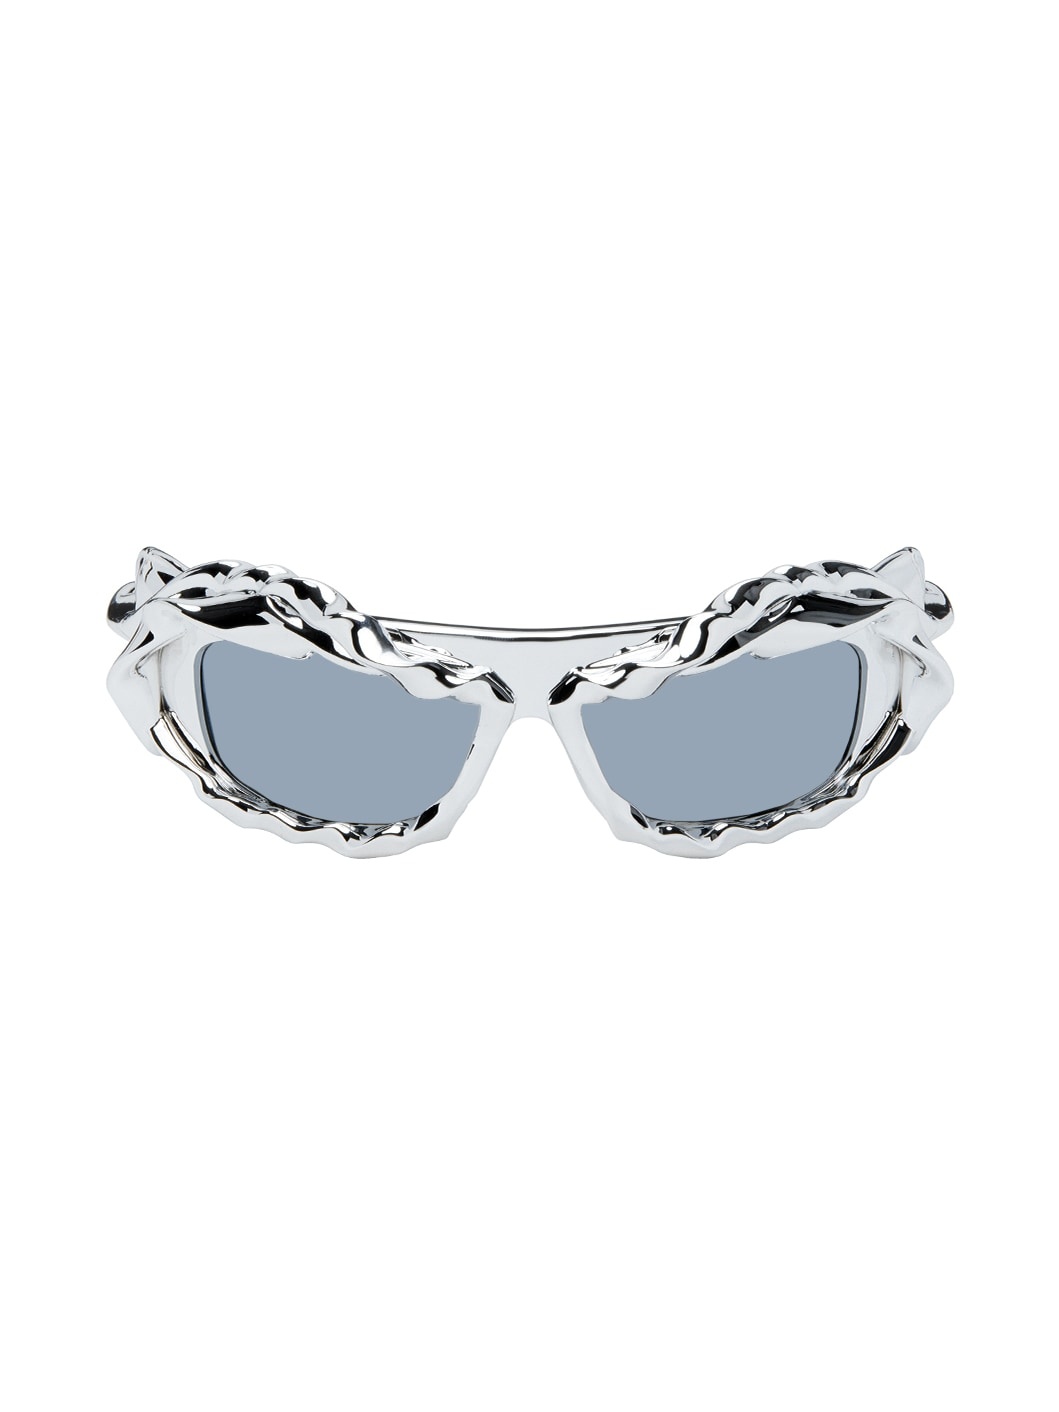 SSENSE Exclusive Silver Twisted Sunglasses - 1